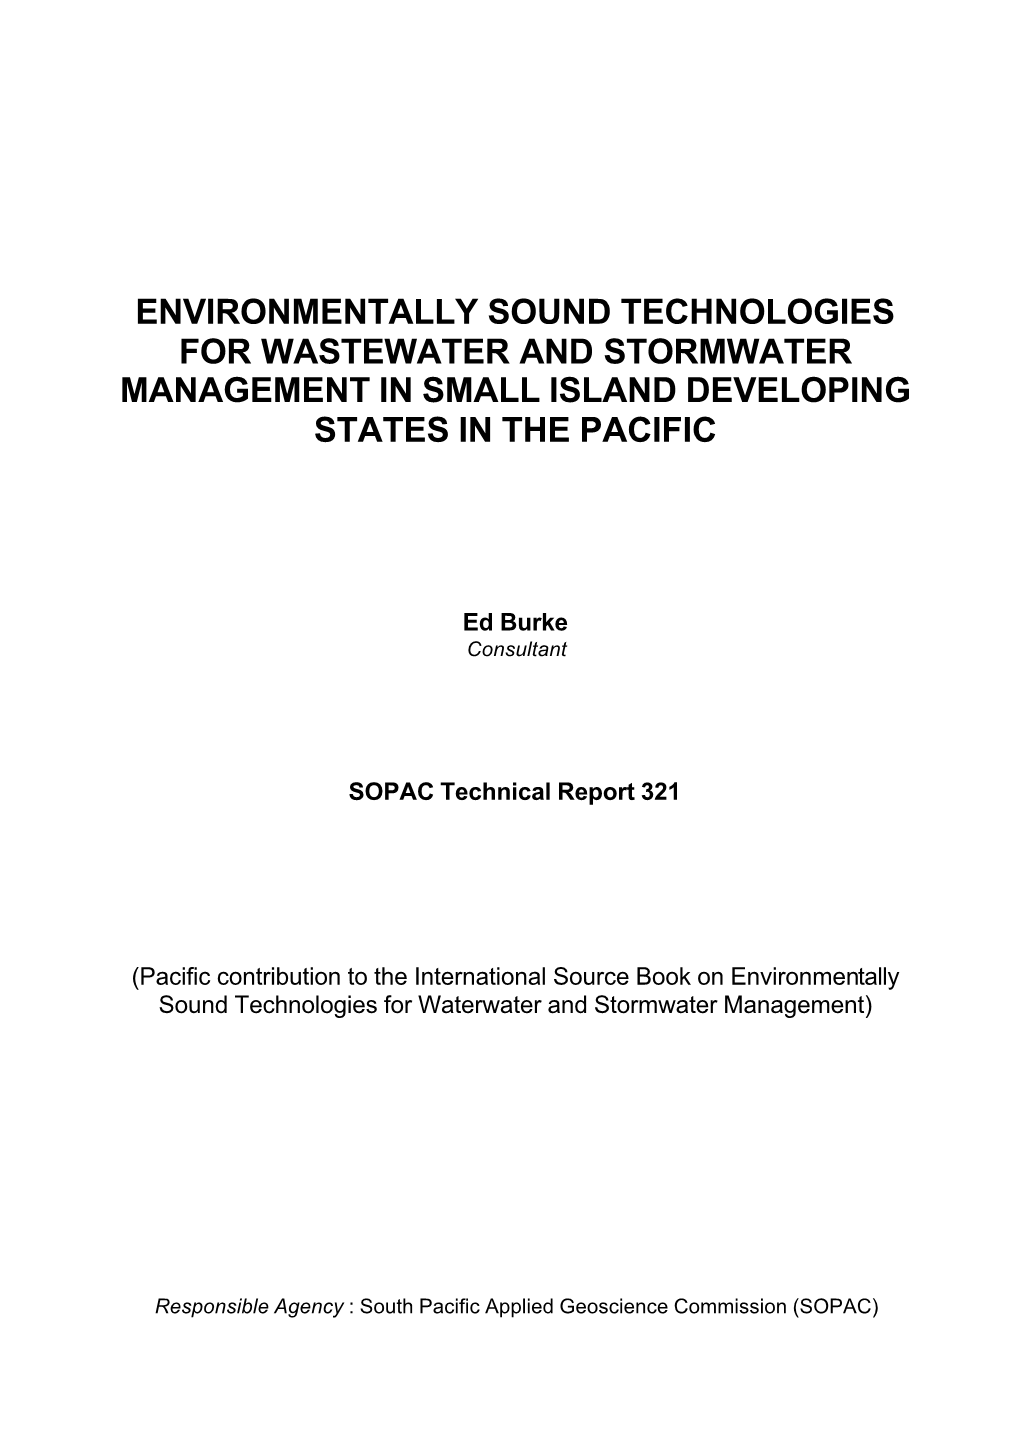 Environmentally Sound Technologies for Wastewater and Stormwater Management in Small Island Developing States in the Pacific